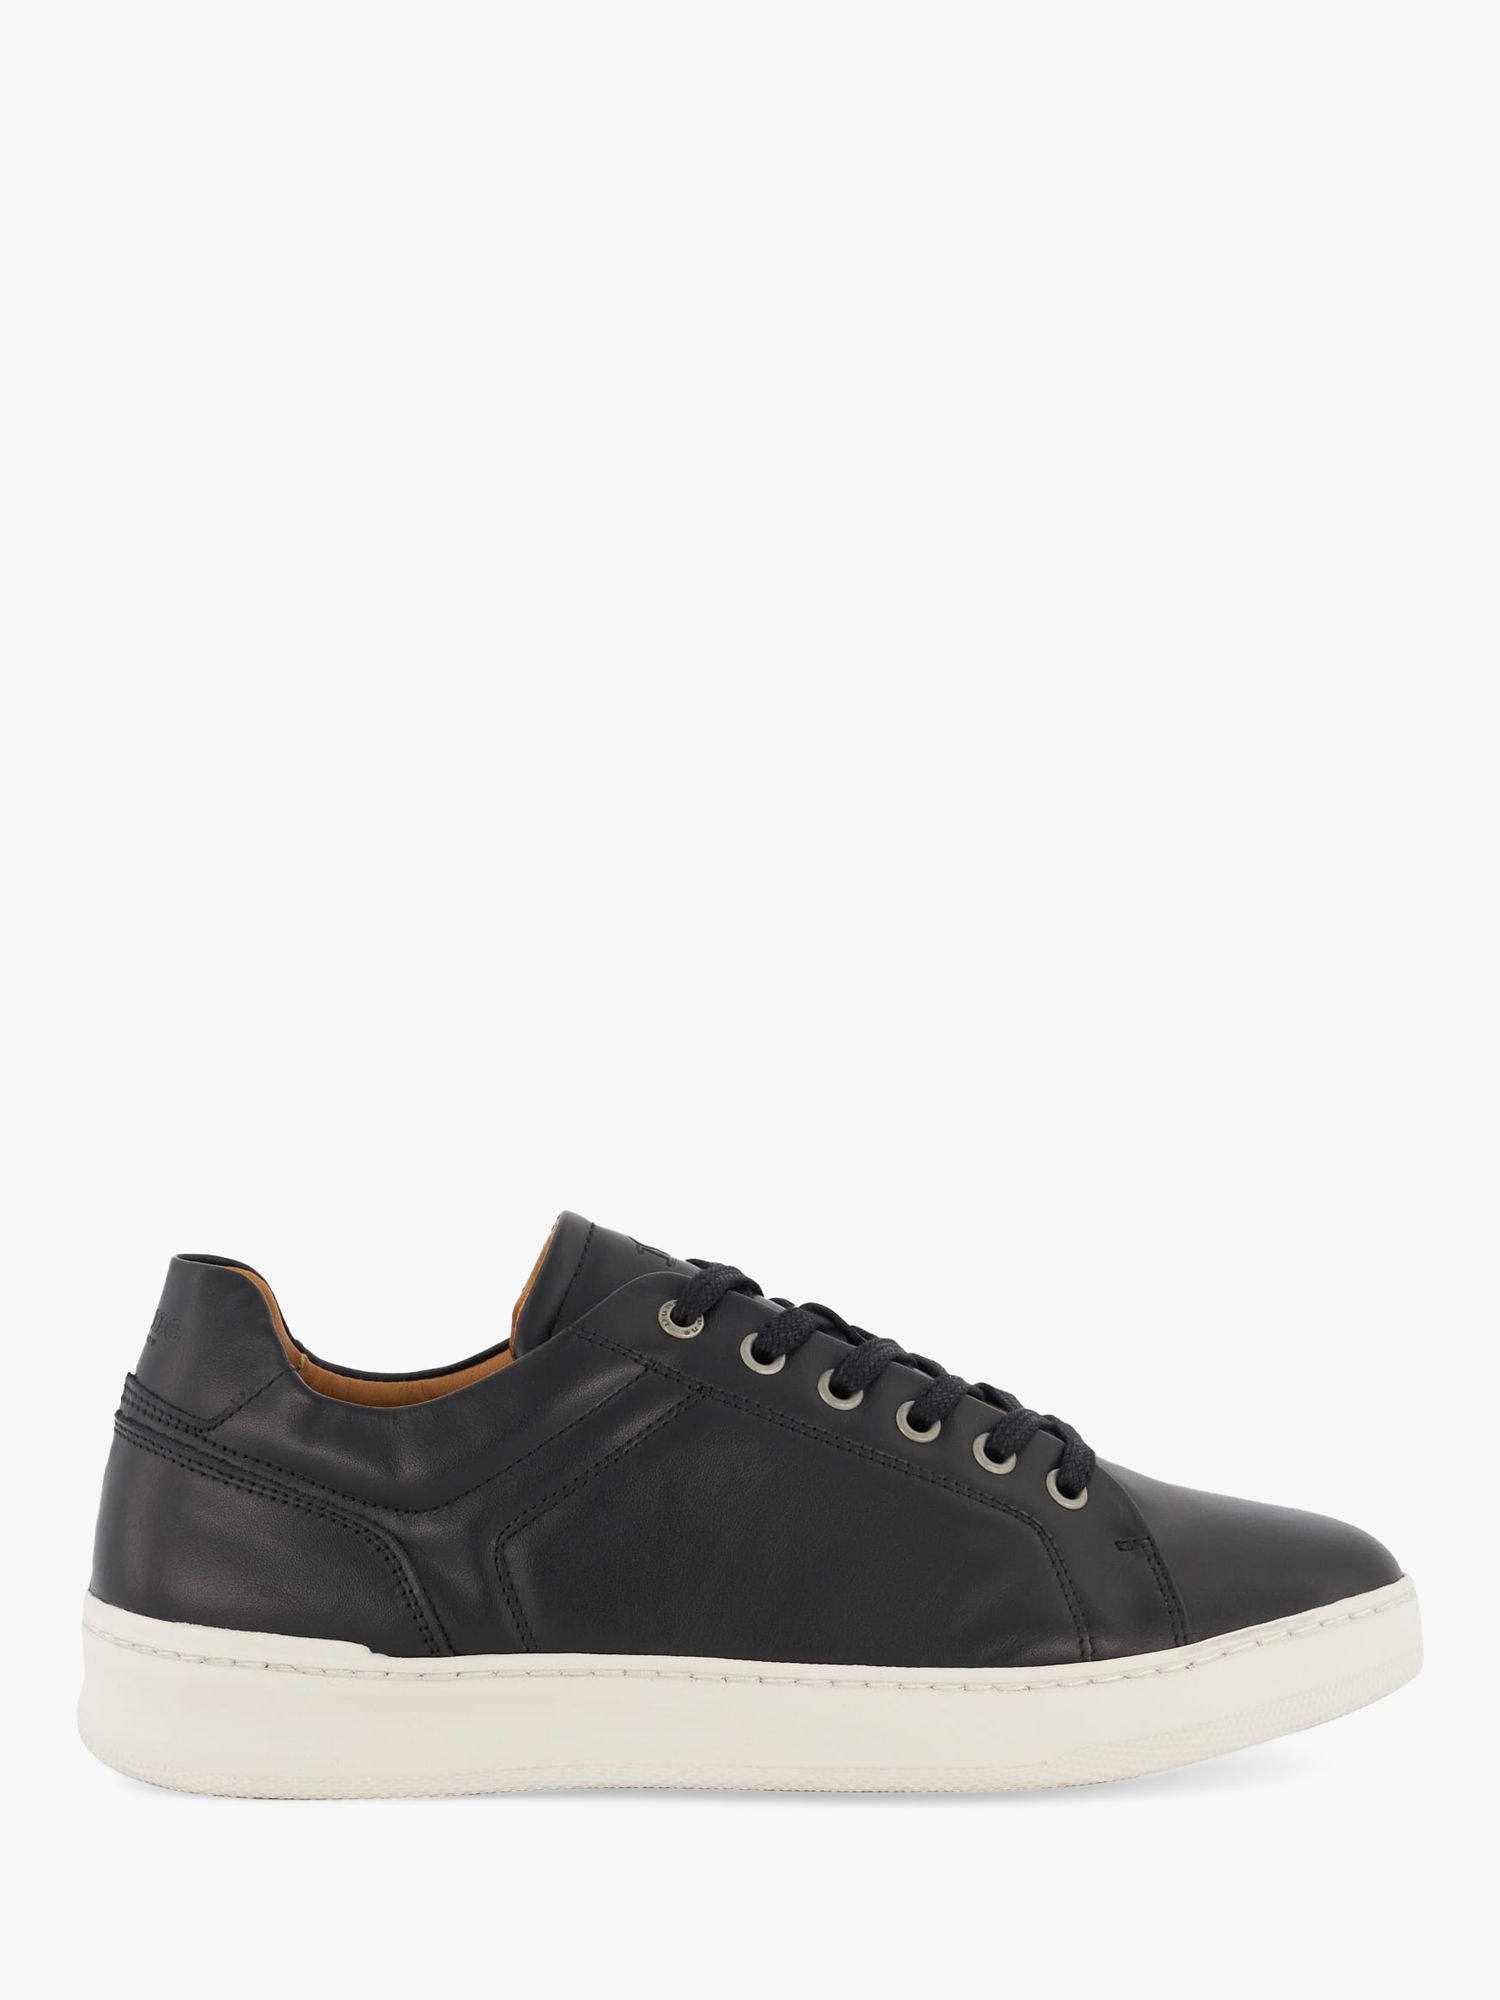 Dune Toledo Low Top Leather Trainers, Black-leather at John Lewis ...